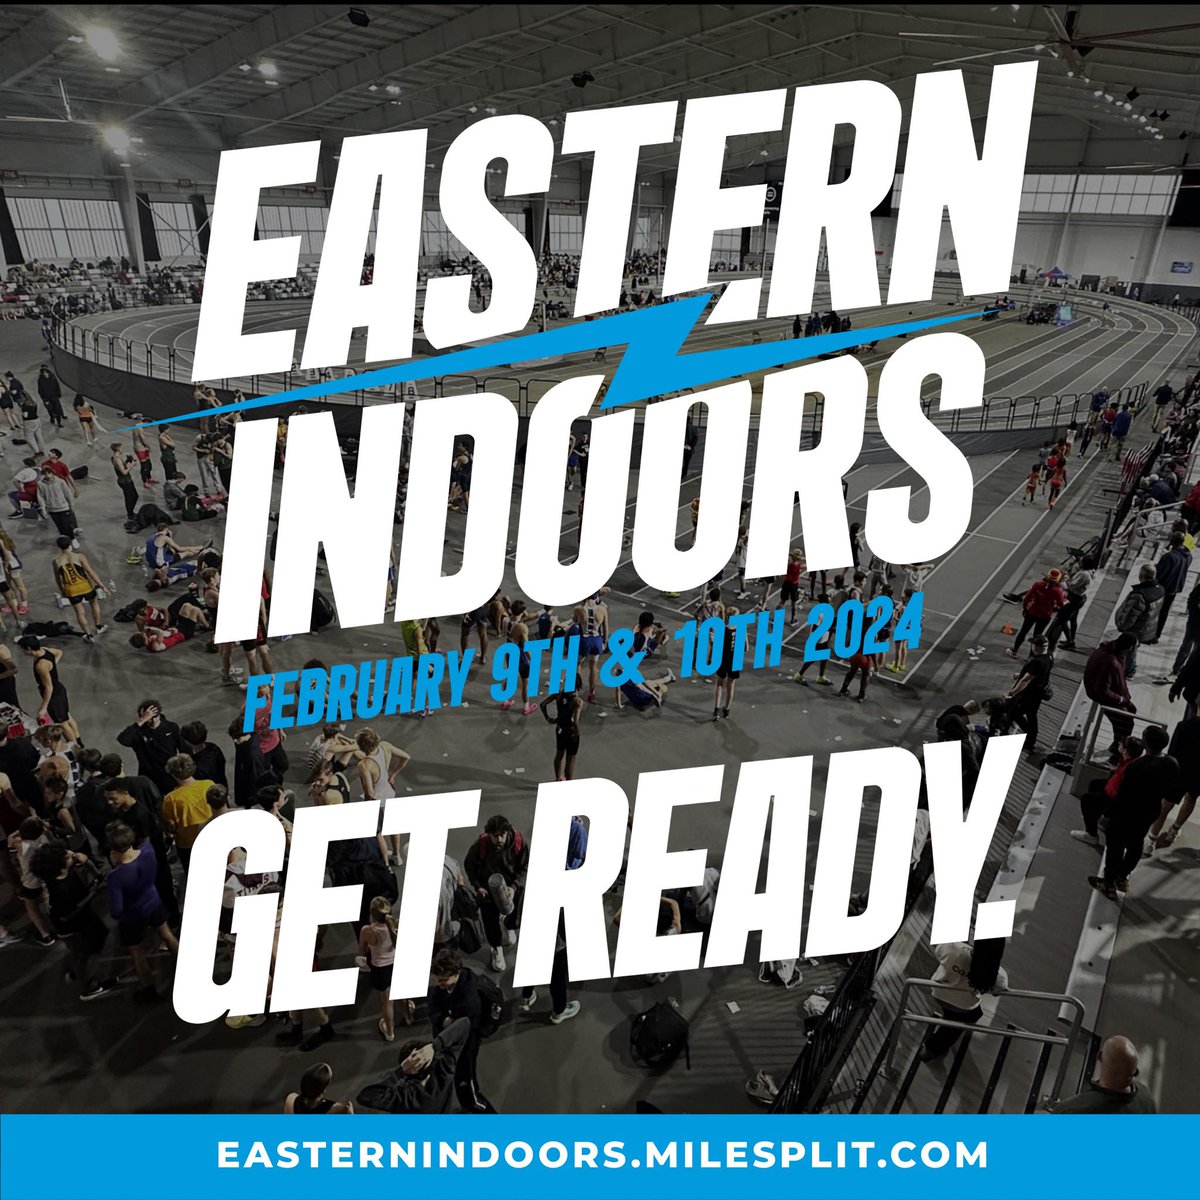 We will likely have over 1500 athletes compete between Friday and Saturday 183 Teams 17 States (KY, IN, OH, NY, IA, GA, TN, MO, AR, MI, NC, MS, AL, TX, KS, LA, IL) Follow the action here, on our Instagram and easternindoors.milesplit.com dct.live easternindoors.pic.run